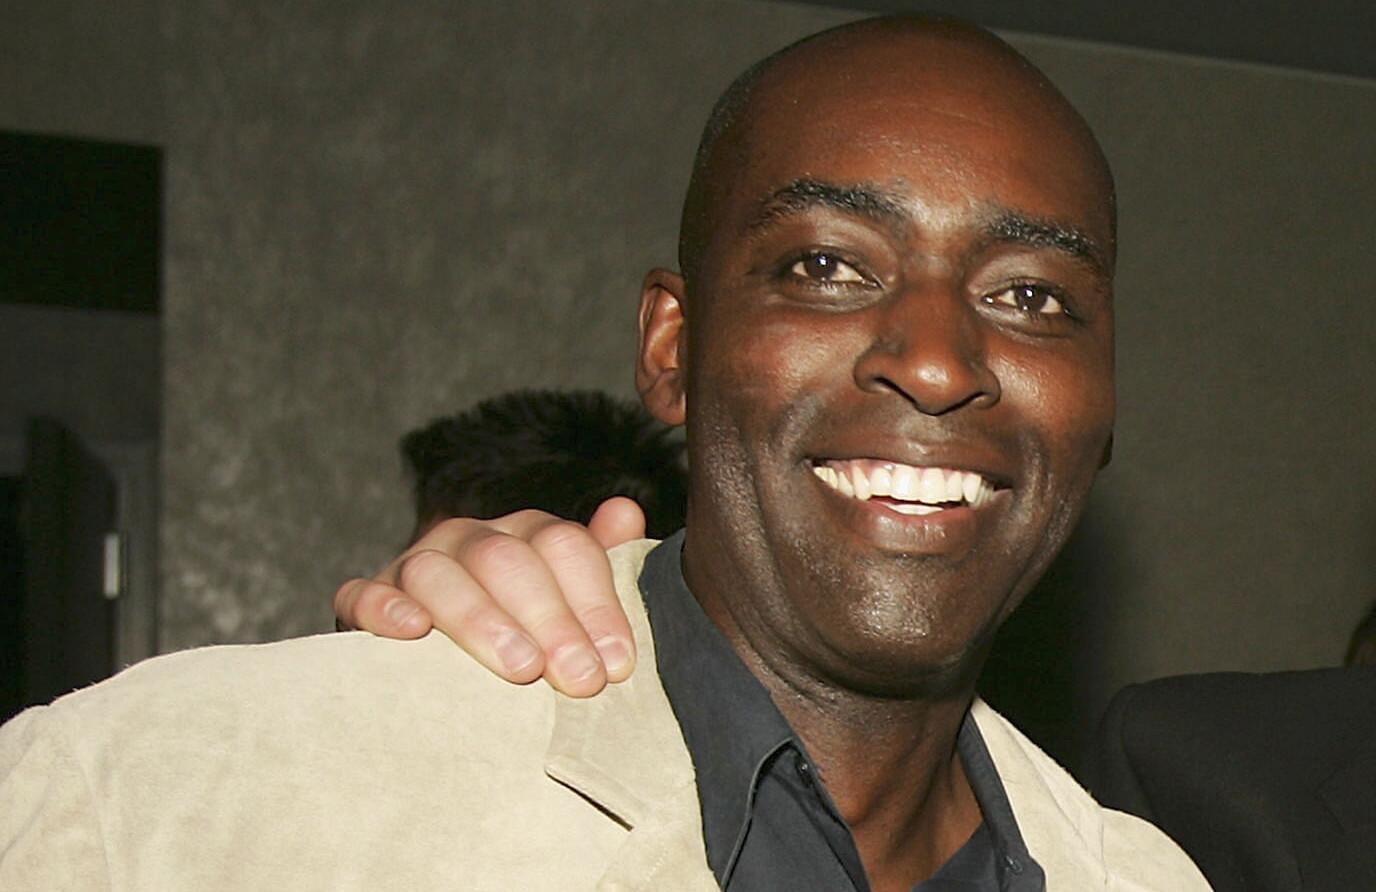 Actor Michael Jace poses at the 4th season premiere screening of FX's "The Shield" on March 12, 2005.